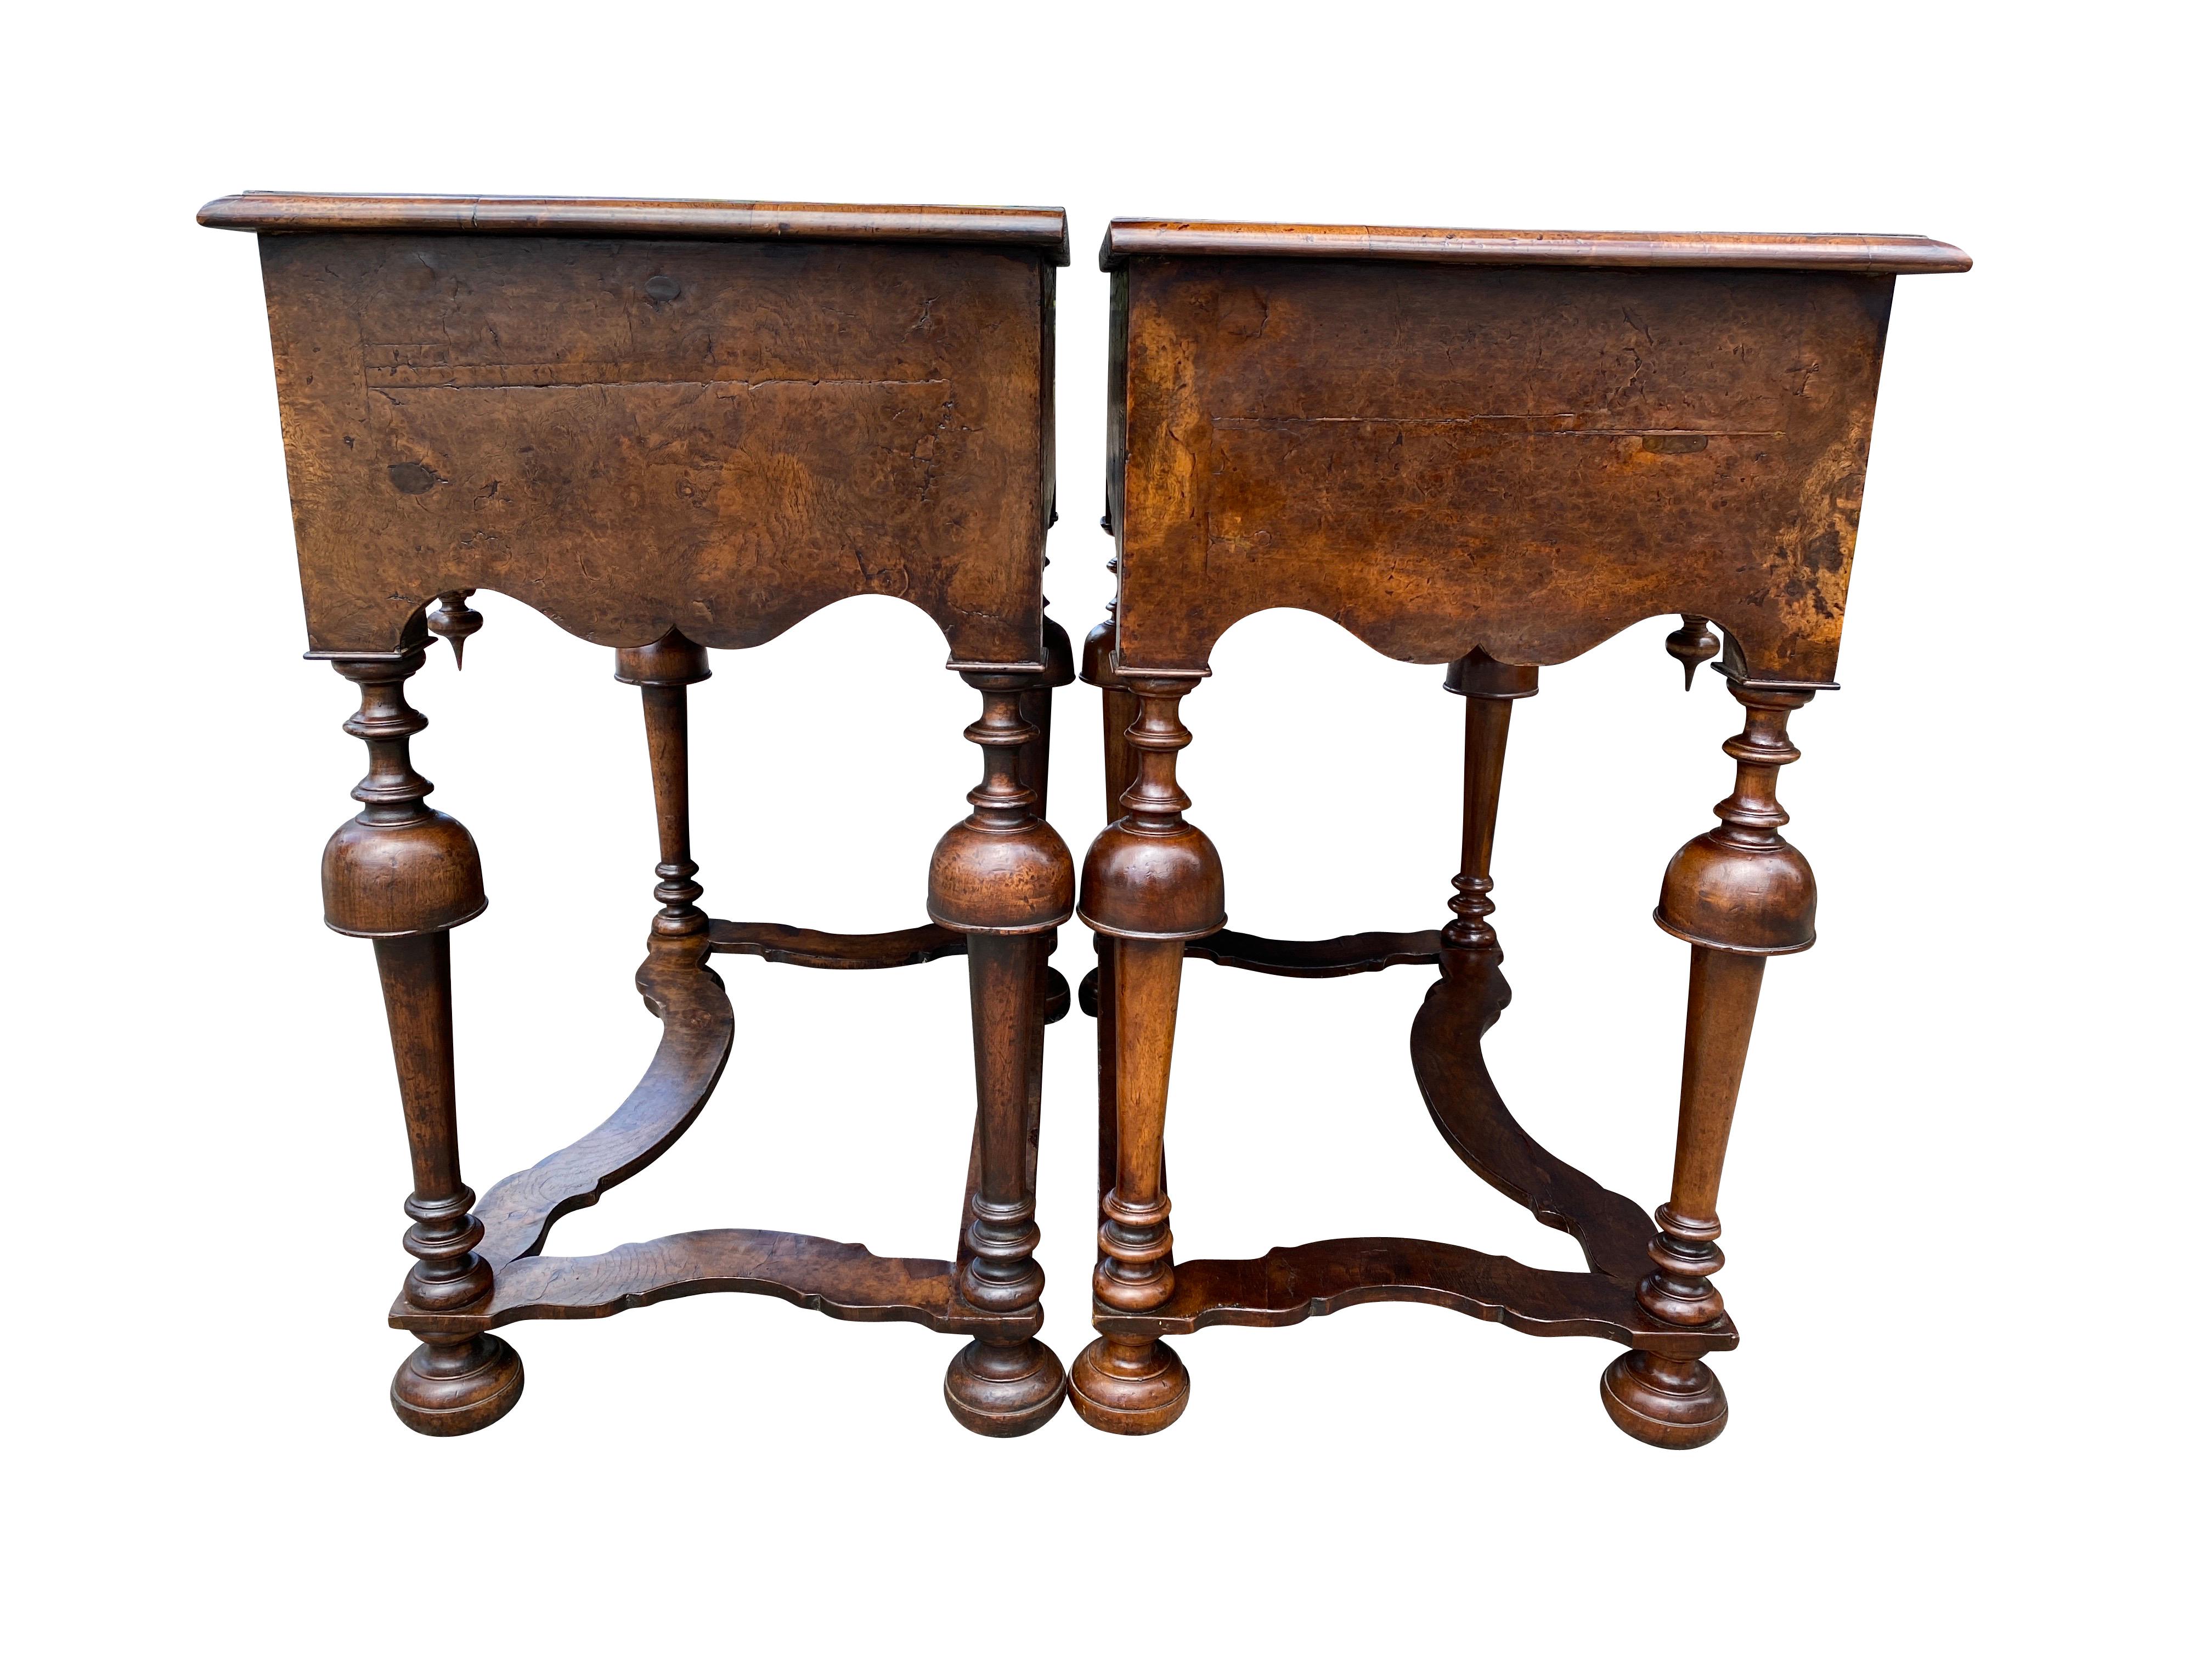 English Pair of William and Mary Style Seaweed Marquetry Side Tables